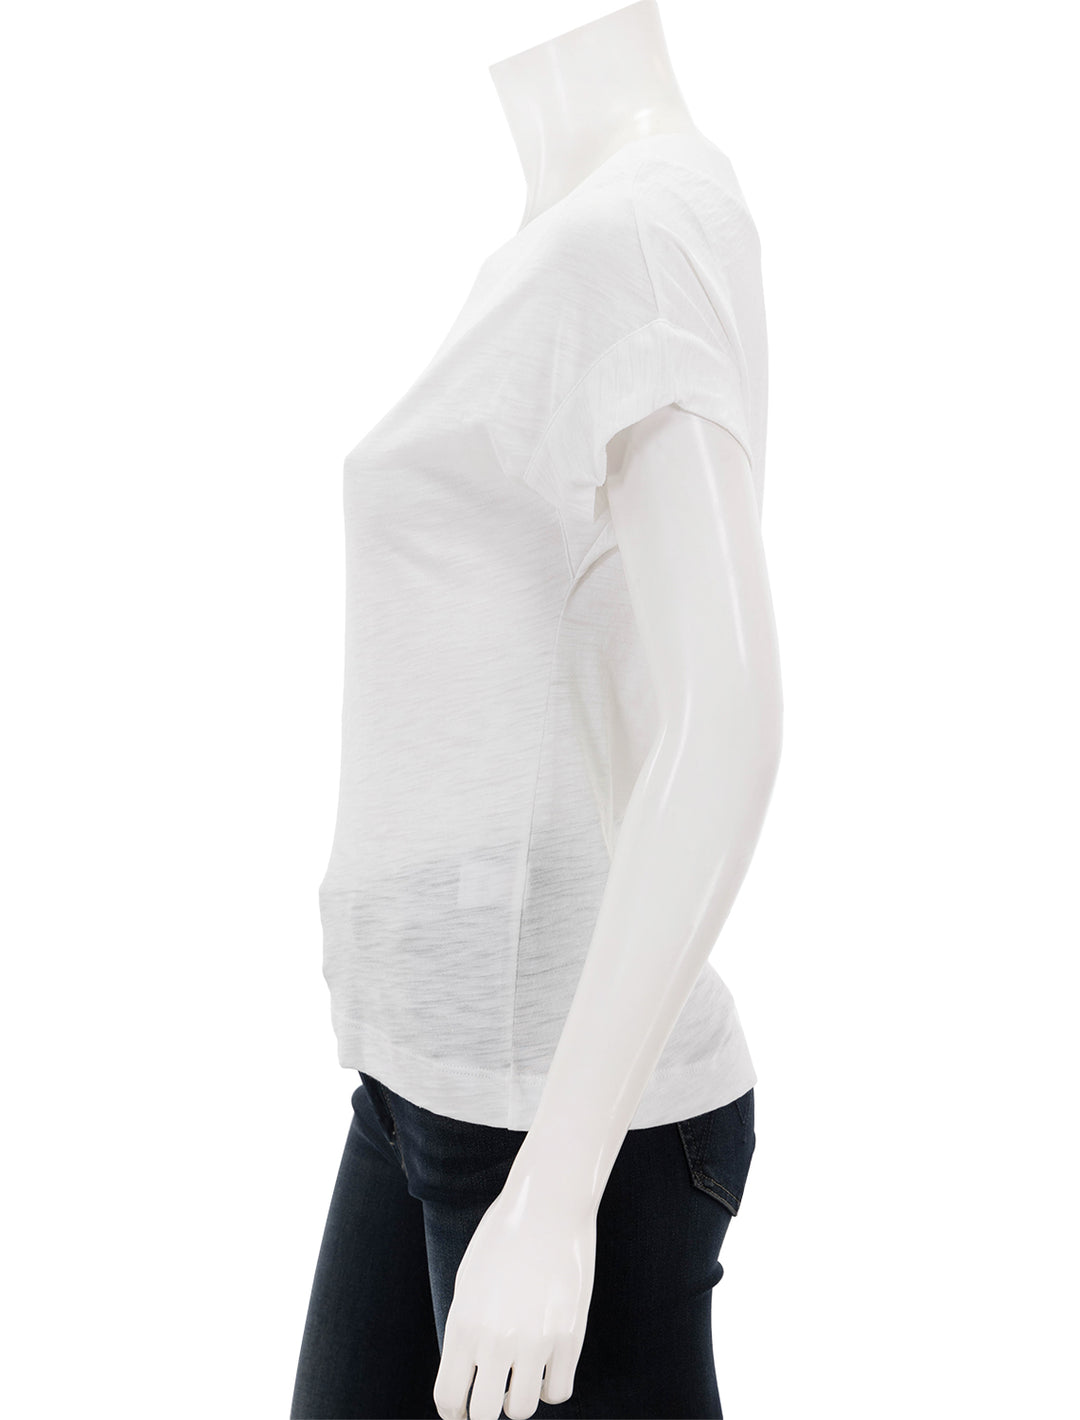 Side view of Goldie Lewinter's mariana basic v neck in white.